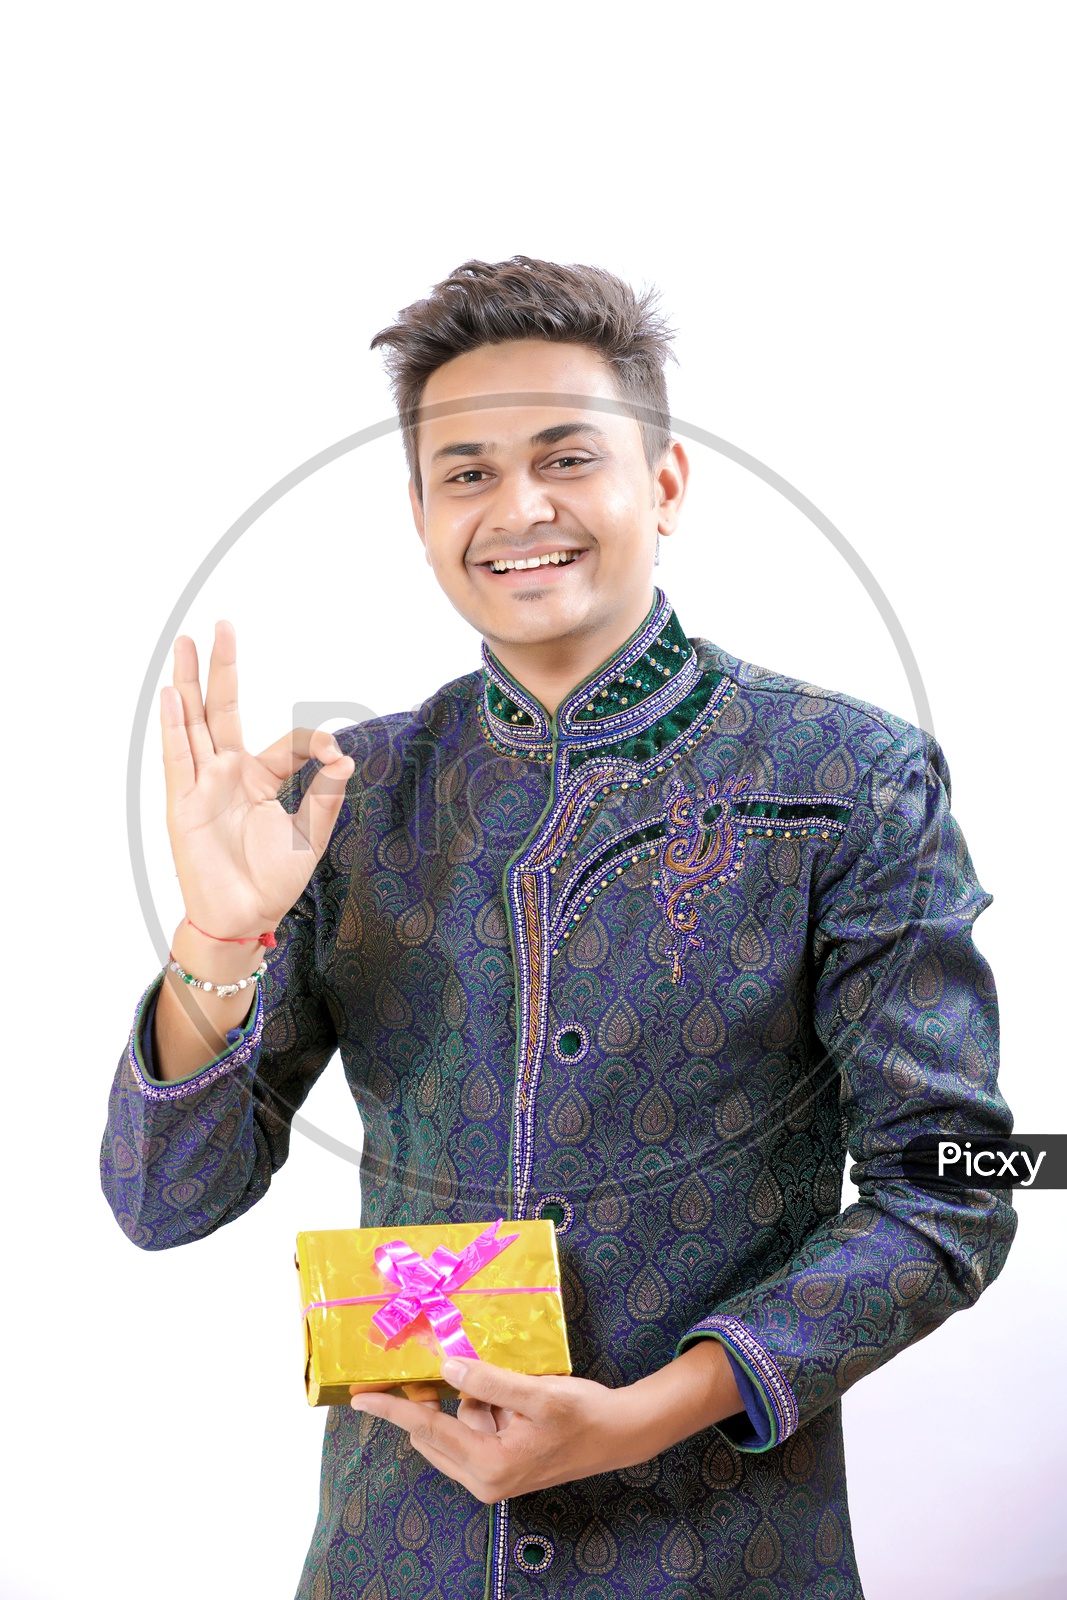 Indian Man In a Traditional Wear with  Expression and Hand Signs gestures  holding a Gift Box in Hand on an Isolated White Background